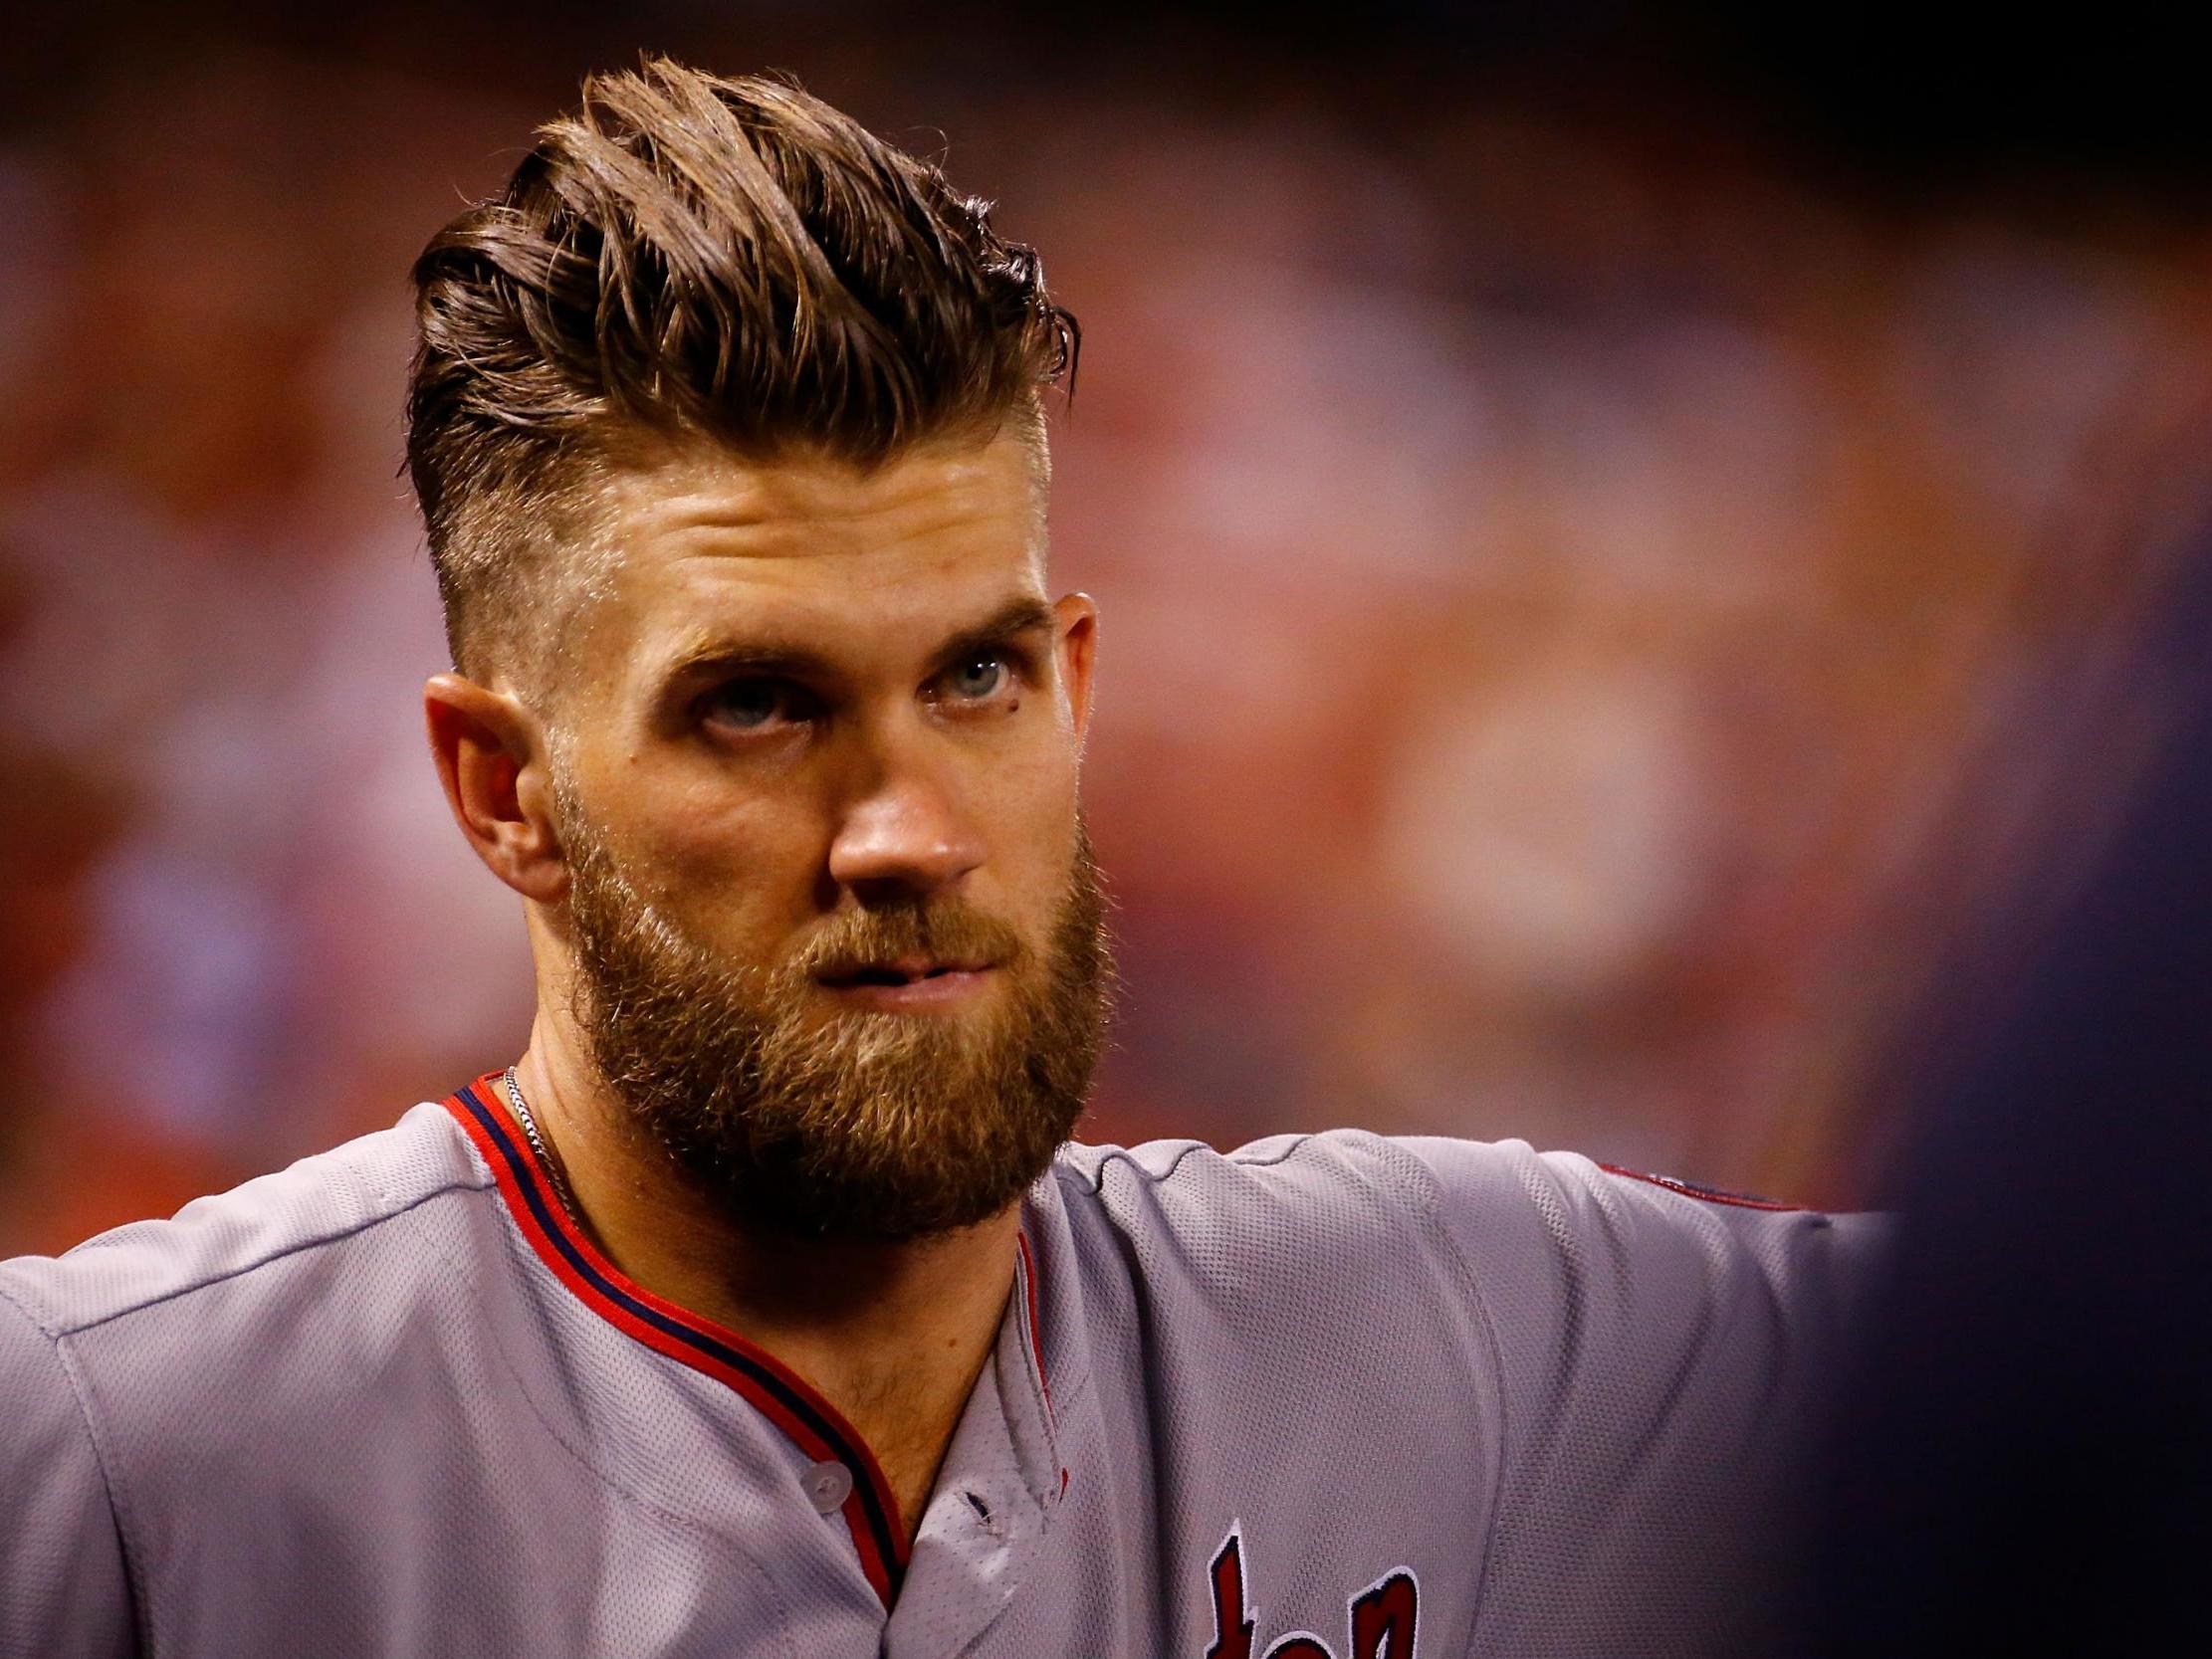 Bryce Harper has signed a 13-year, $330m deal with the Philadelphia Phillies